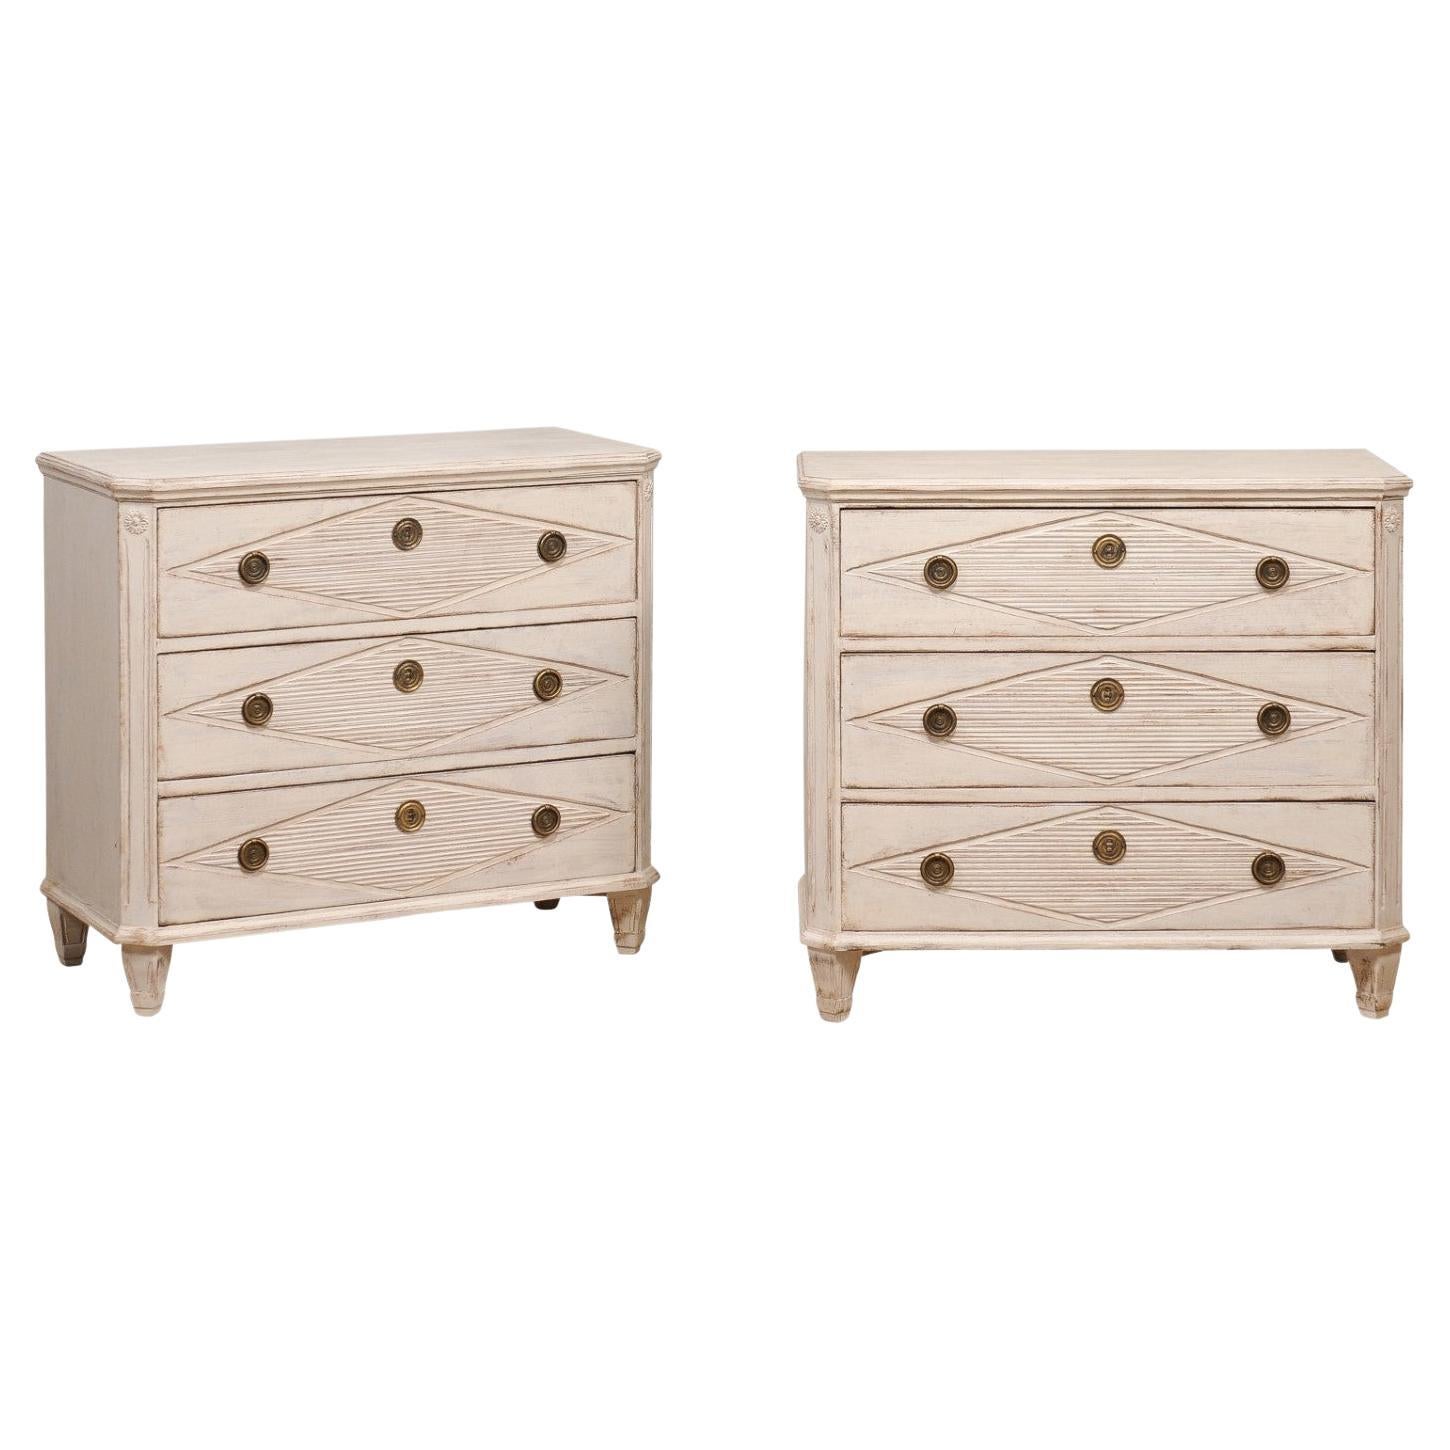 Gustavian Style 19th Century Painted Chests with Carved Diamond Motifs, a Pair For Sale